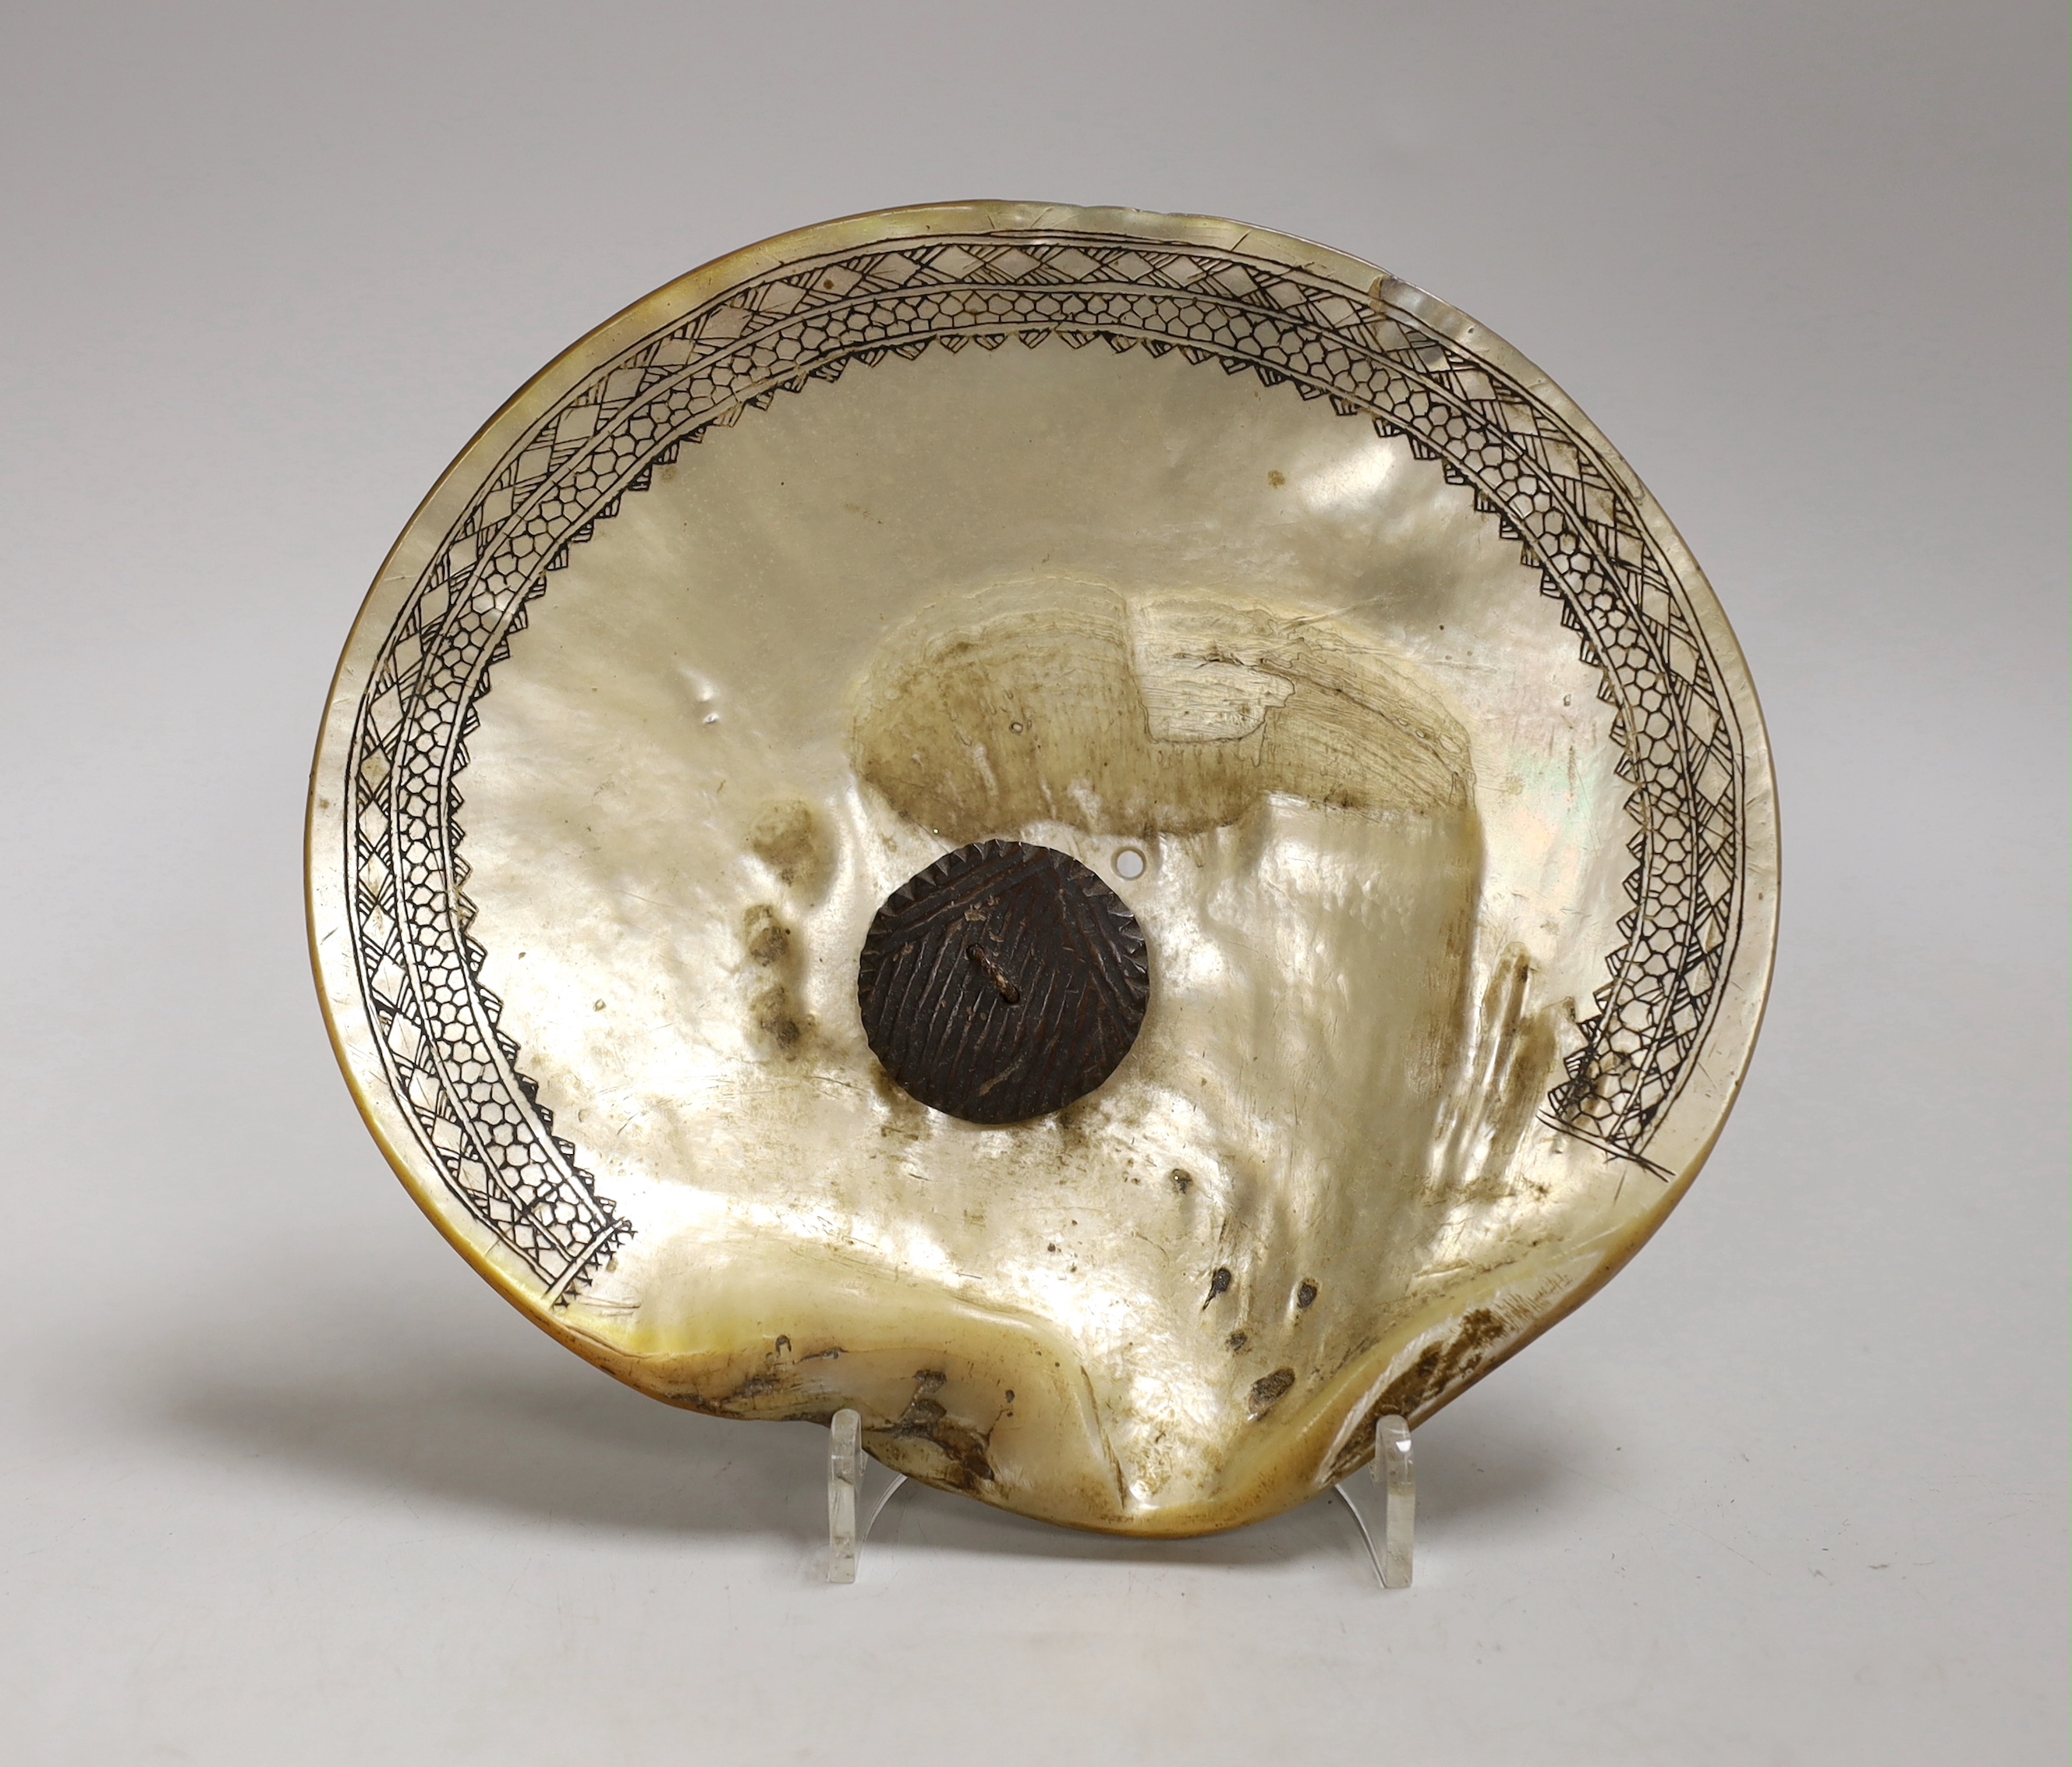 Bontoc Tribe, Luzon, North Island Philippines, a fikum hip decoration, engraved mother of pearl shell, 18cm., Provenance – a European Private collection, thence by family descent. Ethnographica from the same collection w